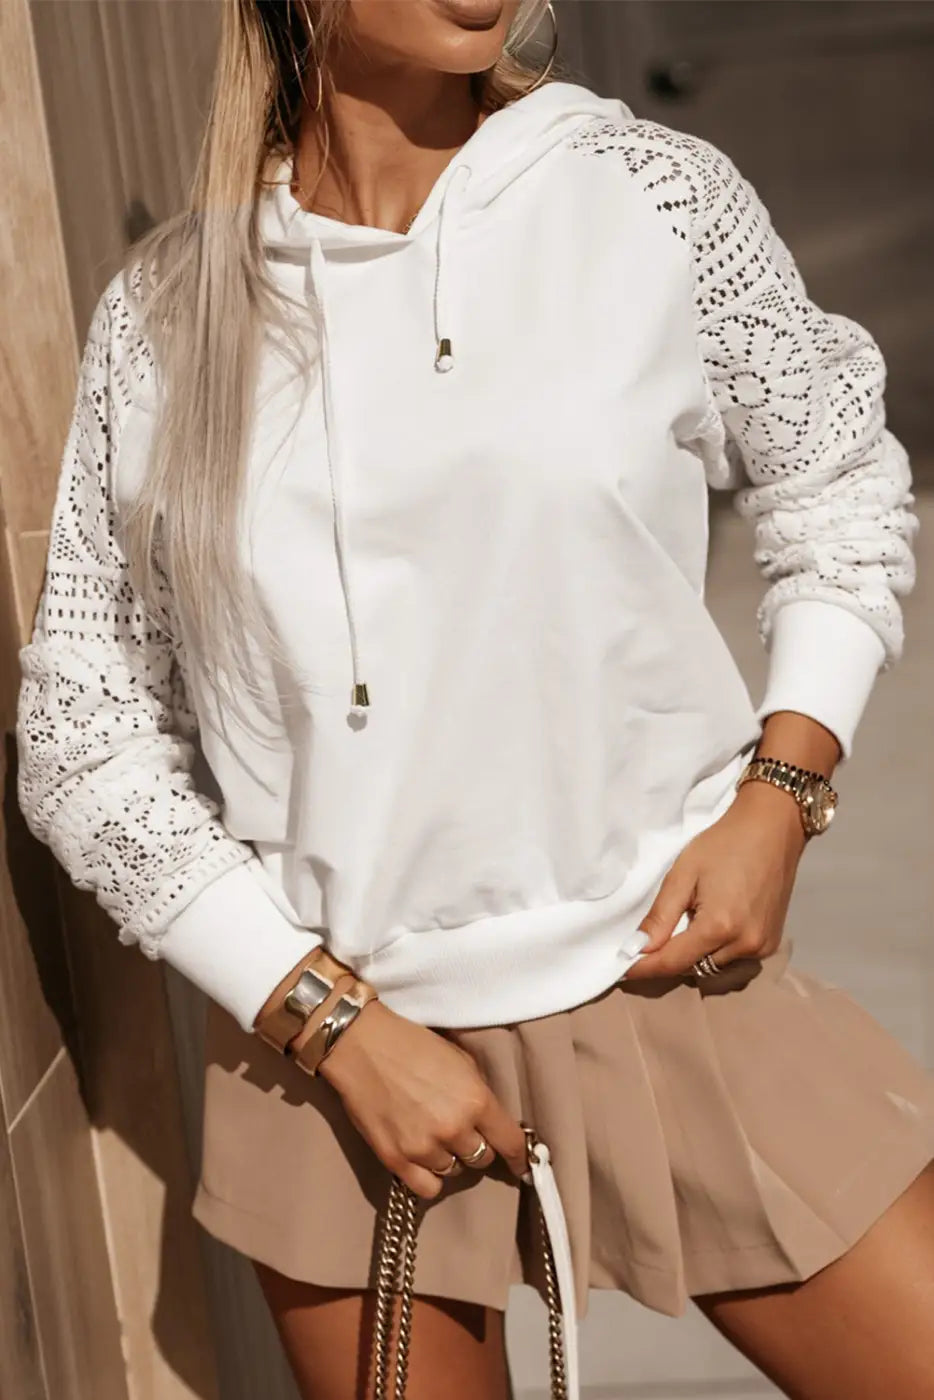 Lacy layers hoodie: white hoodie with lace-patterned sleeves and drawstring details